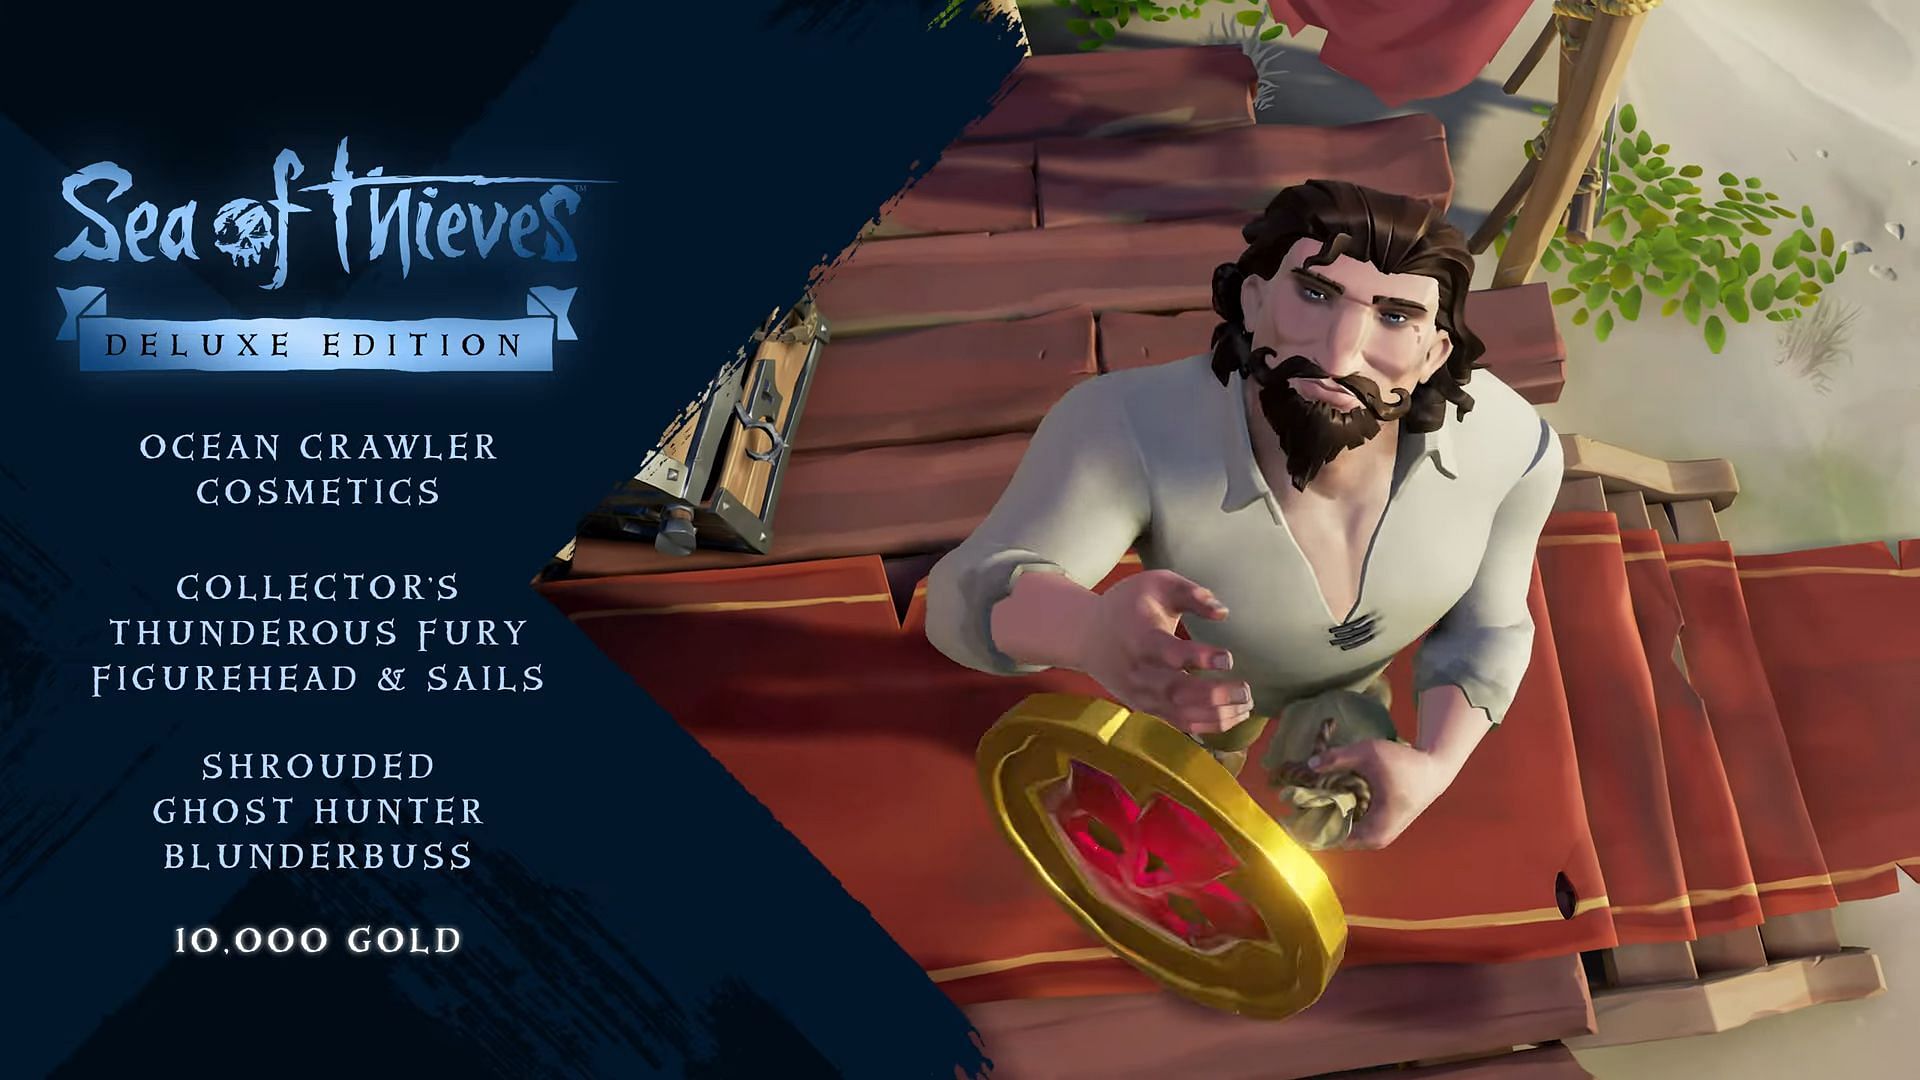 You get 10,000 gold as a bonus in Sea of Thieves Deluxe Edition (Image via Rare)